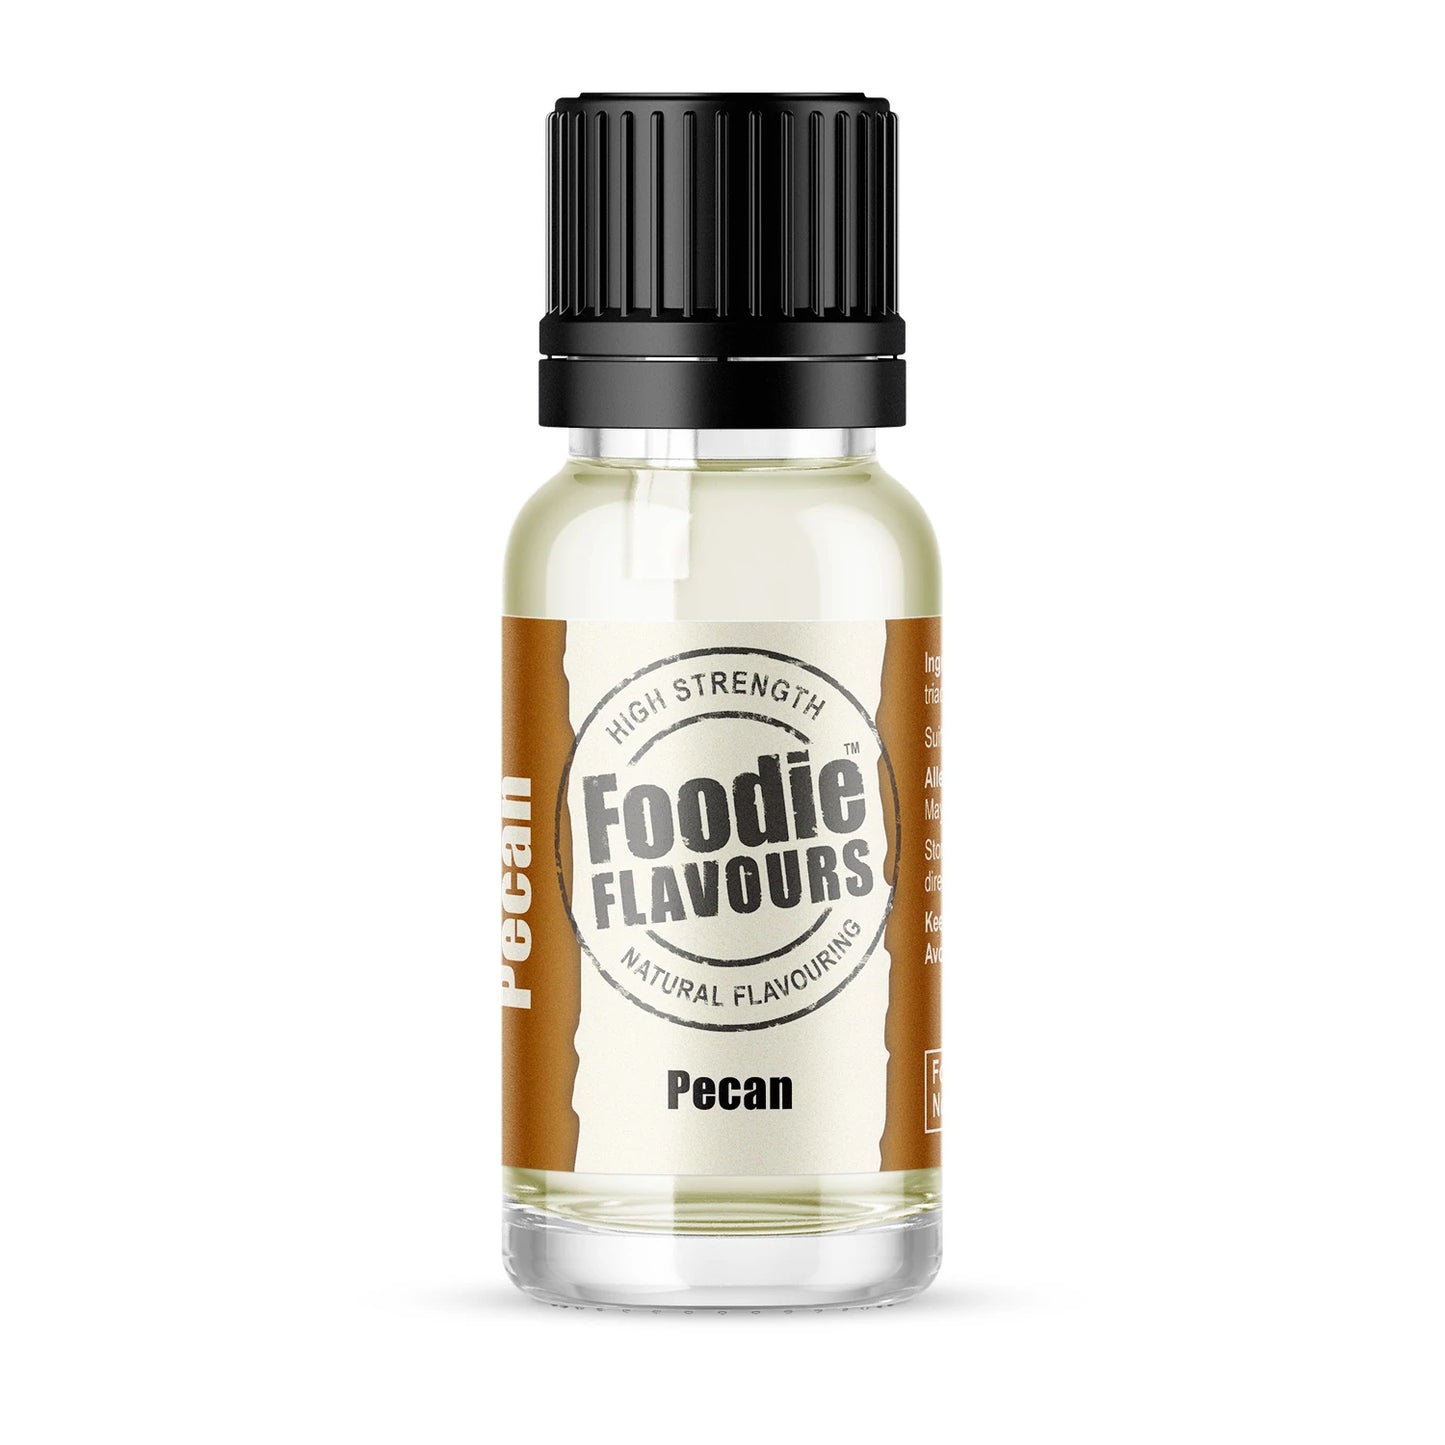 Pecan "Nut Free" Natural Flavour (15ml)